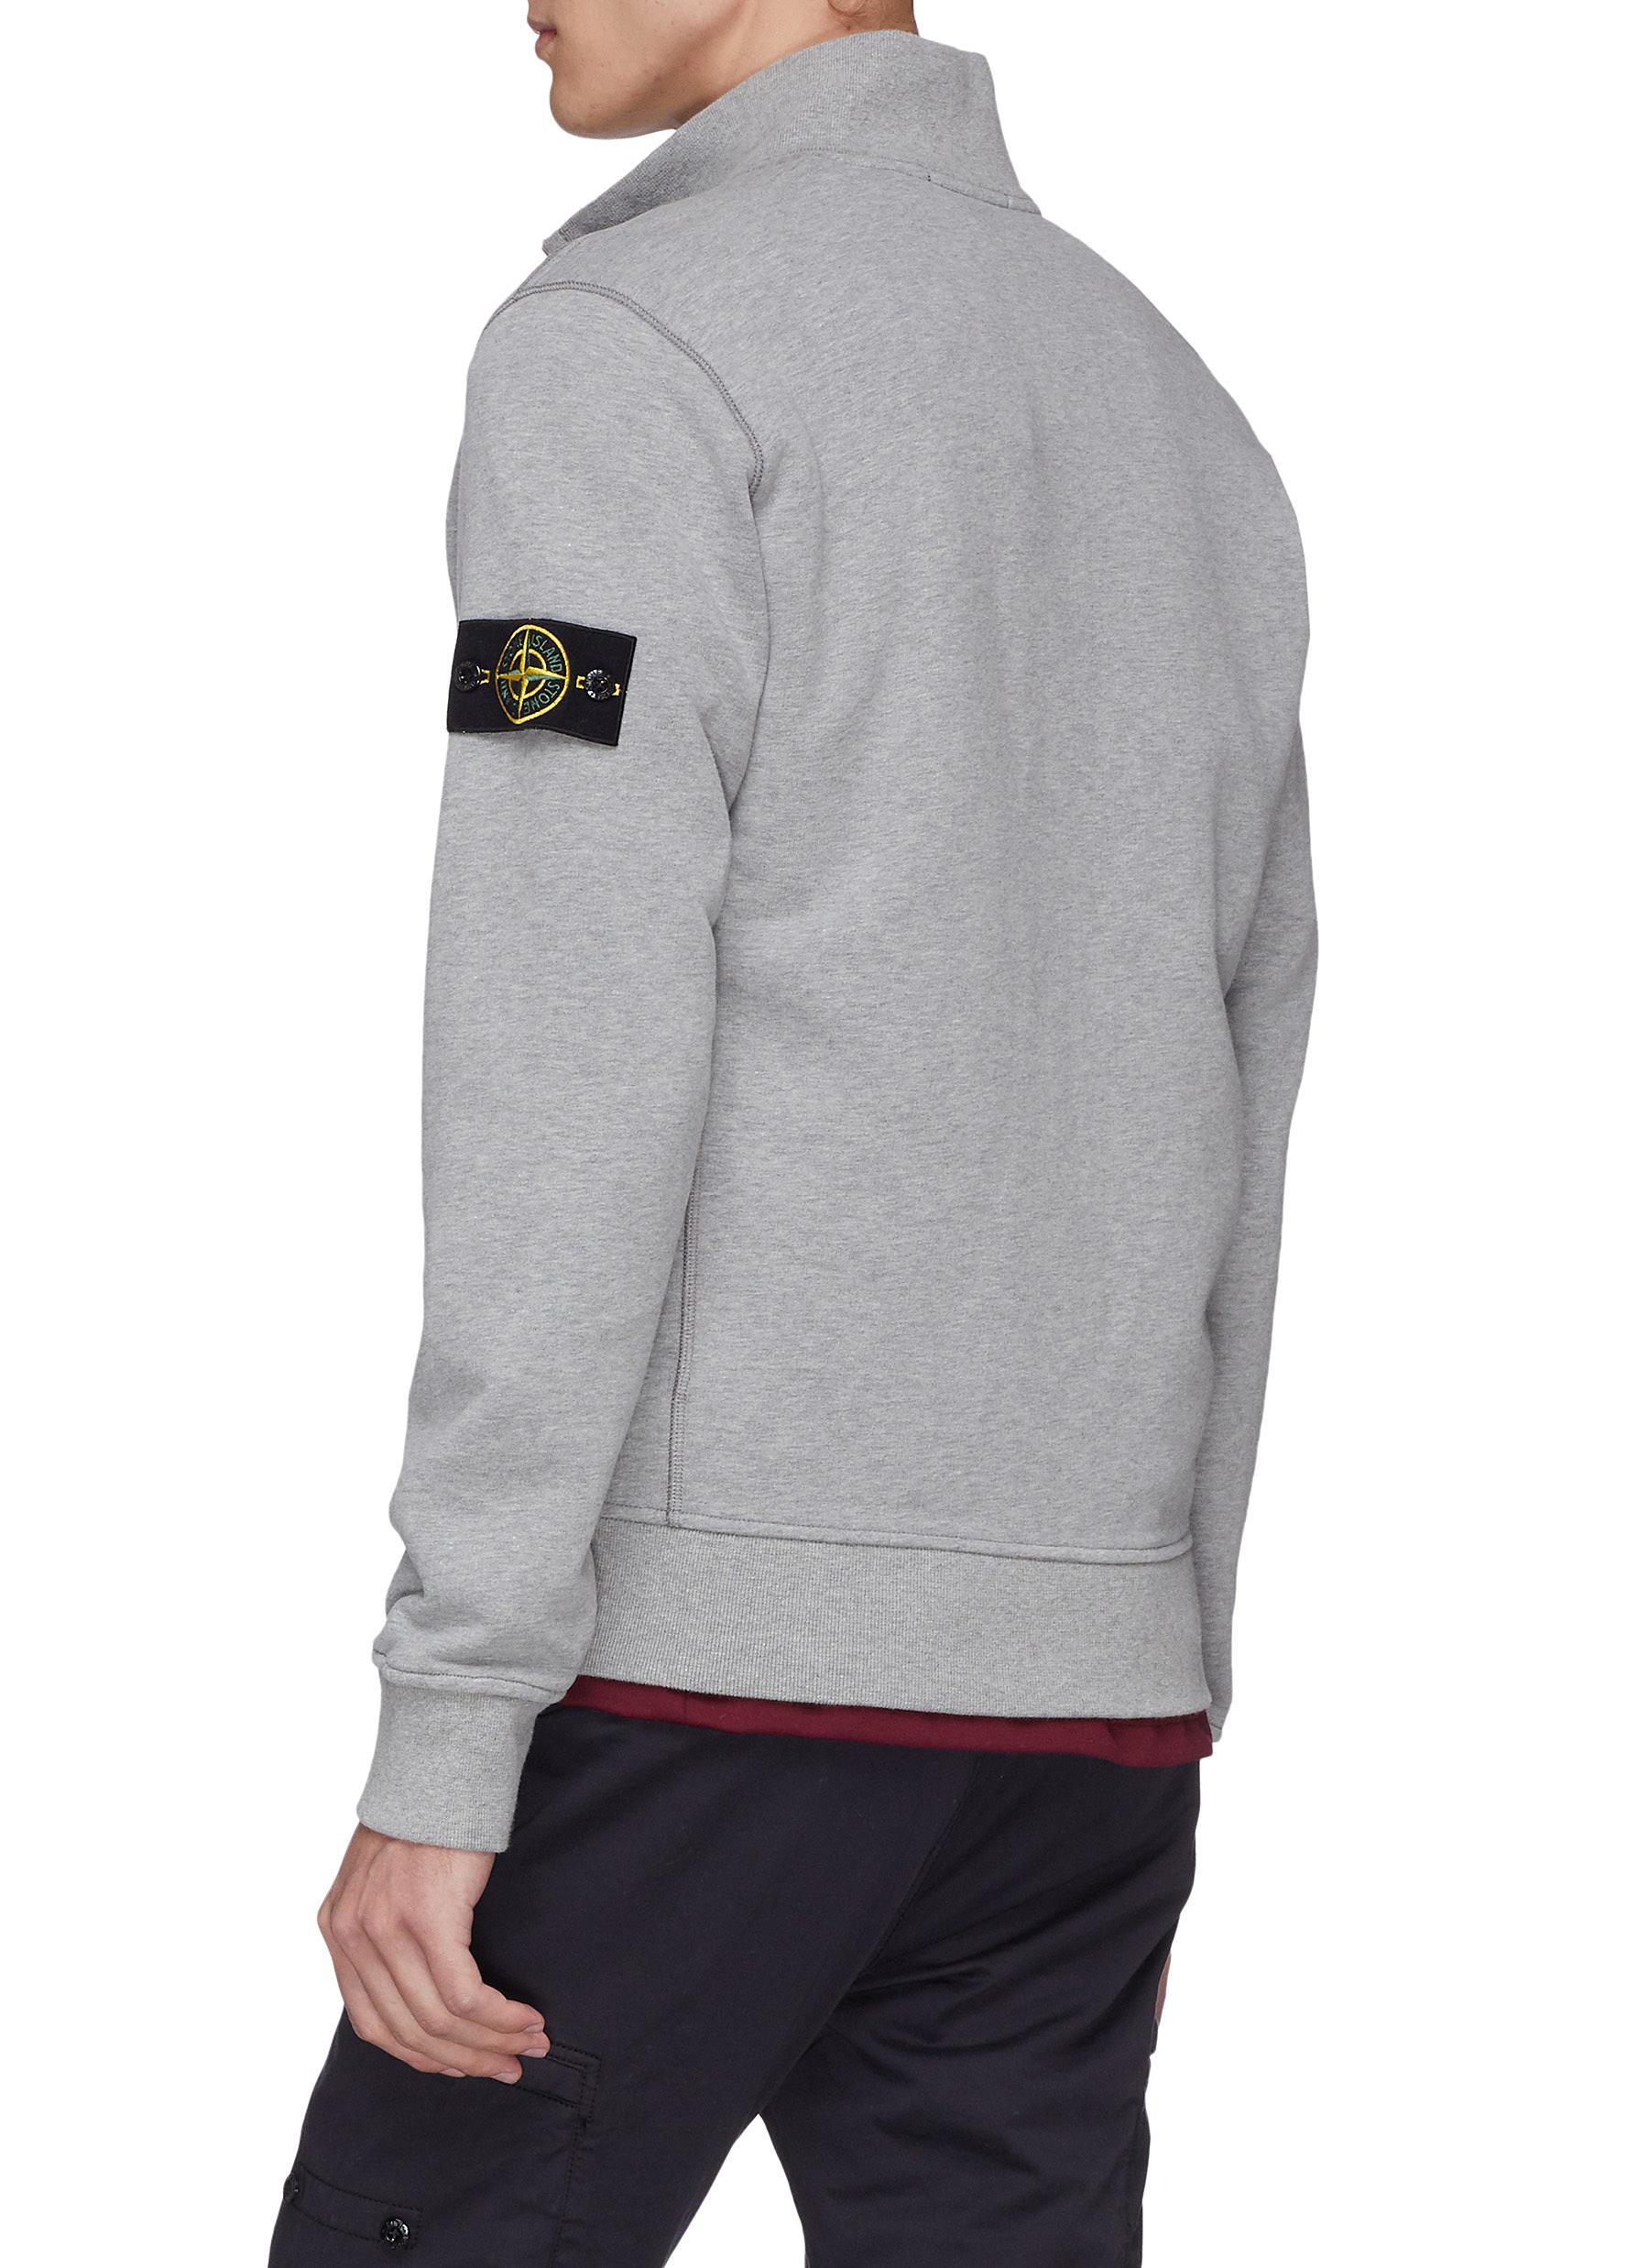 stone island track top Promotions